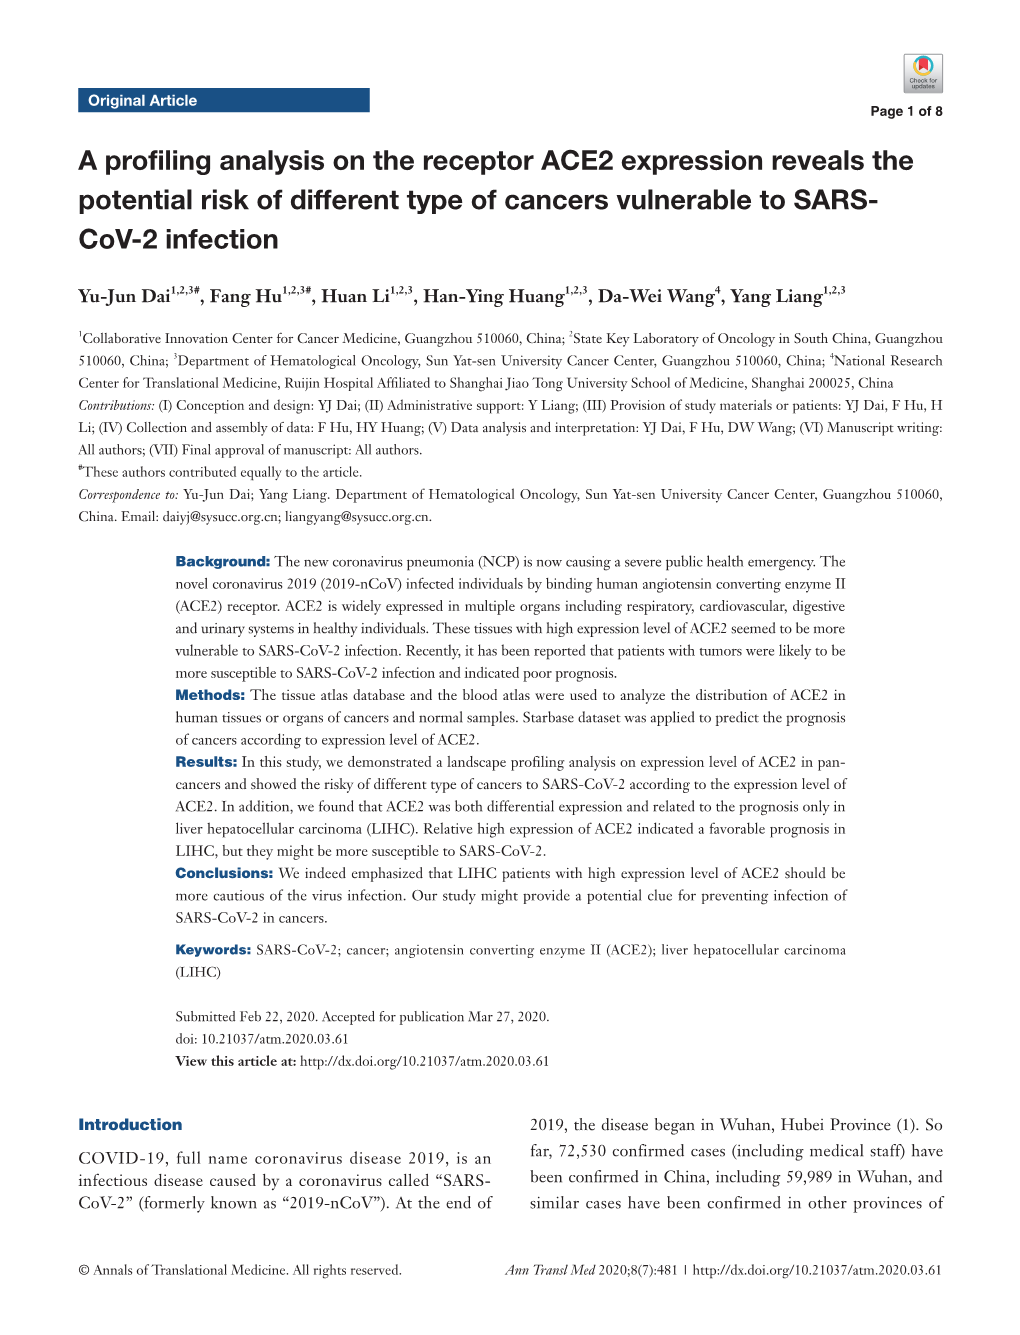 A Profiling Analysis on the Receptor ACE2 Expression Reveals the Potential Risk of Different Type of Cancers Vulnerable to SARS- Cov-2 Infection